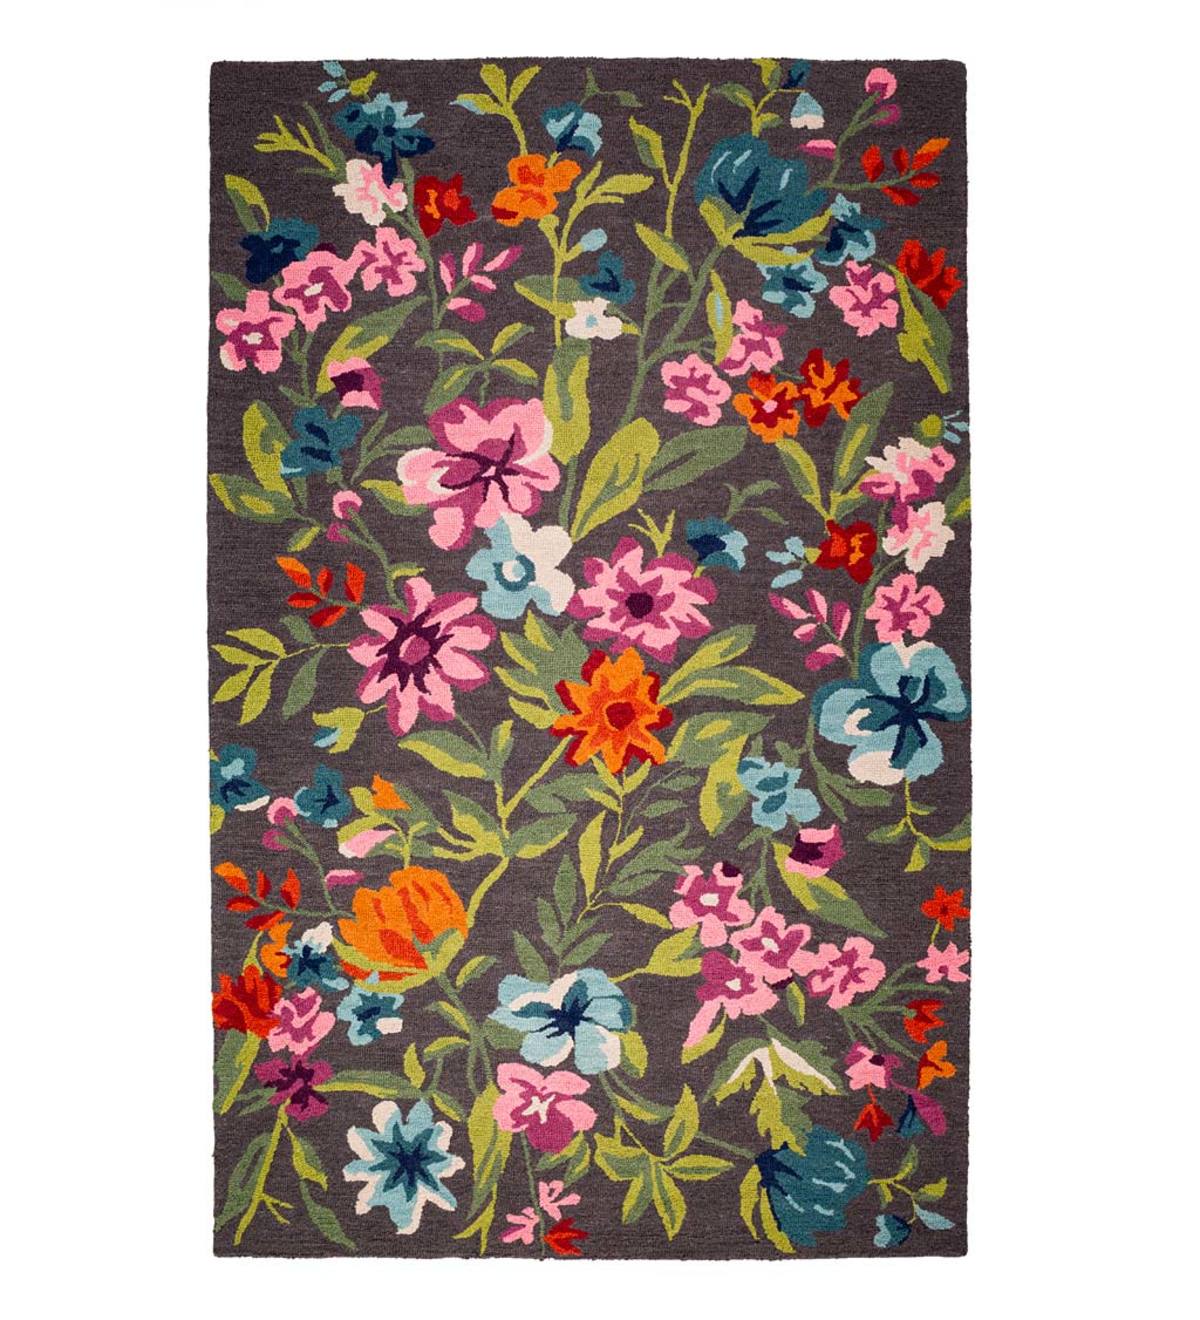 Belle Grove Hand-Tufted Wool Floral Area Rug, 8' x 10'